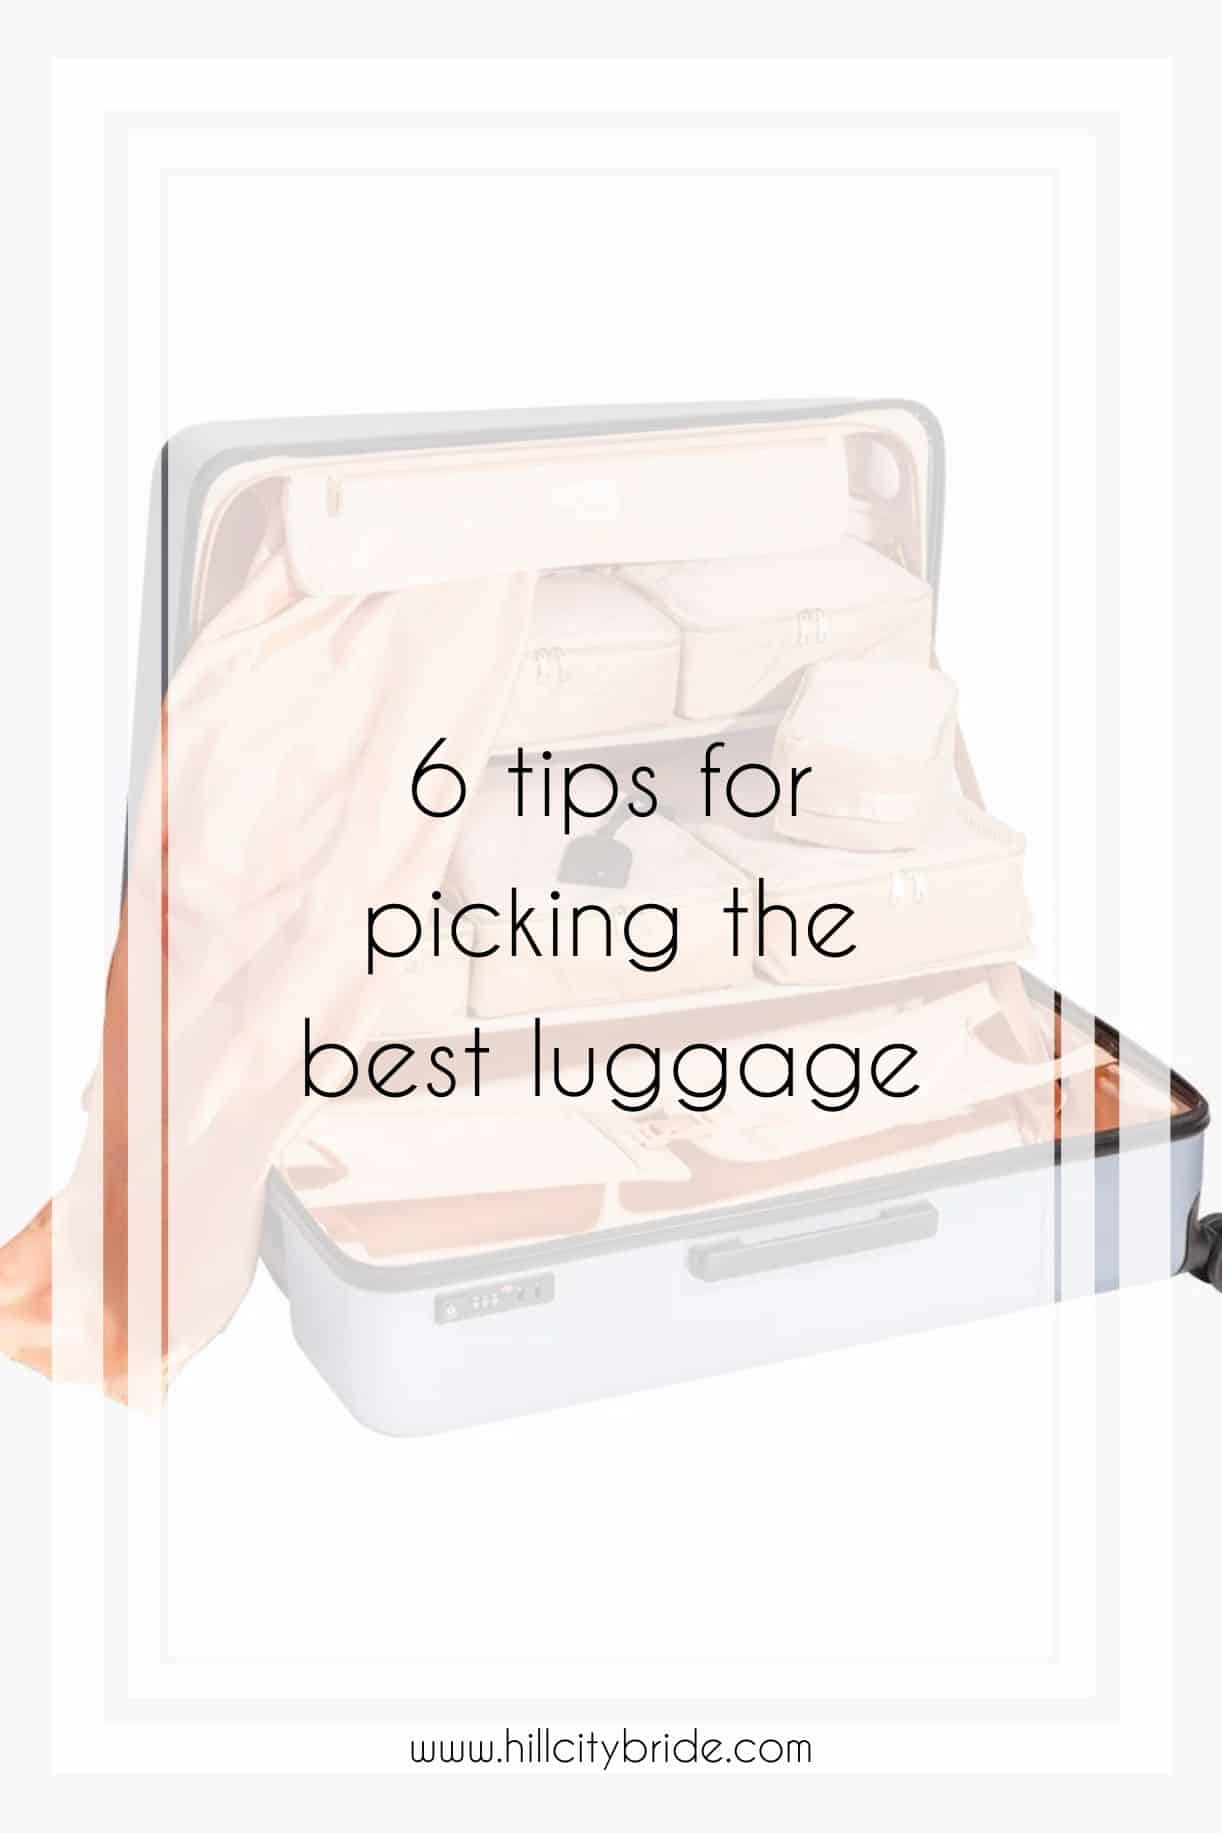 How to Pick the Best Luggage